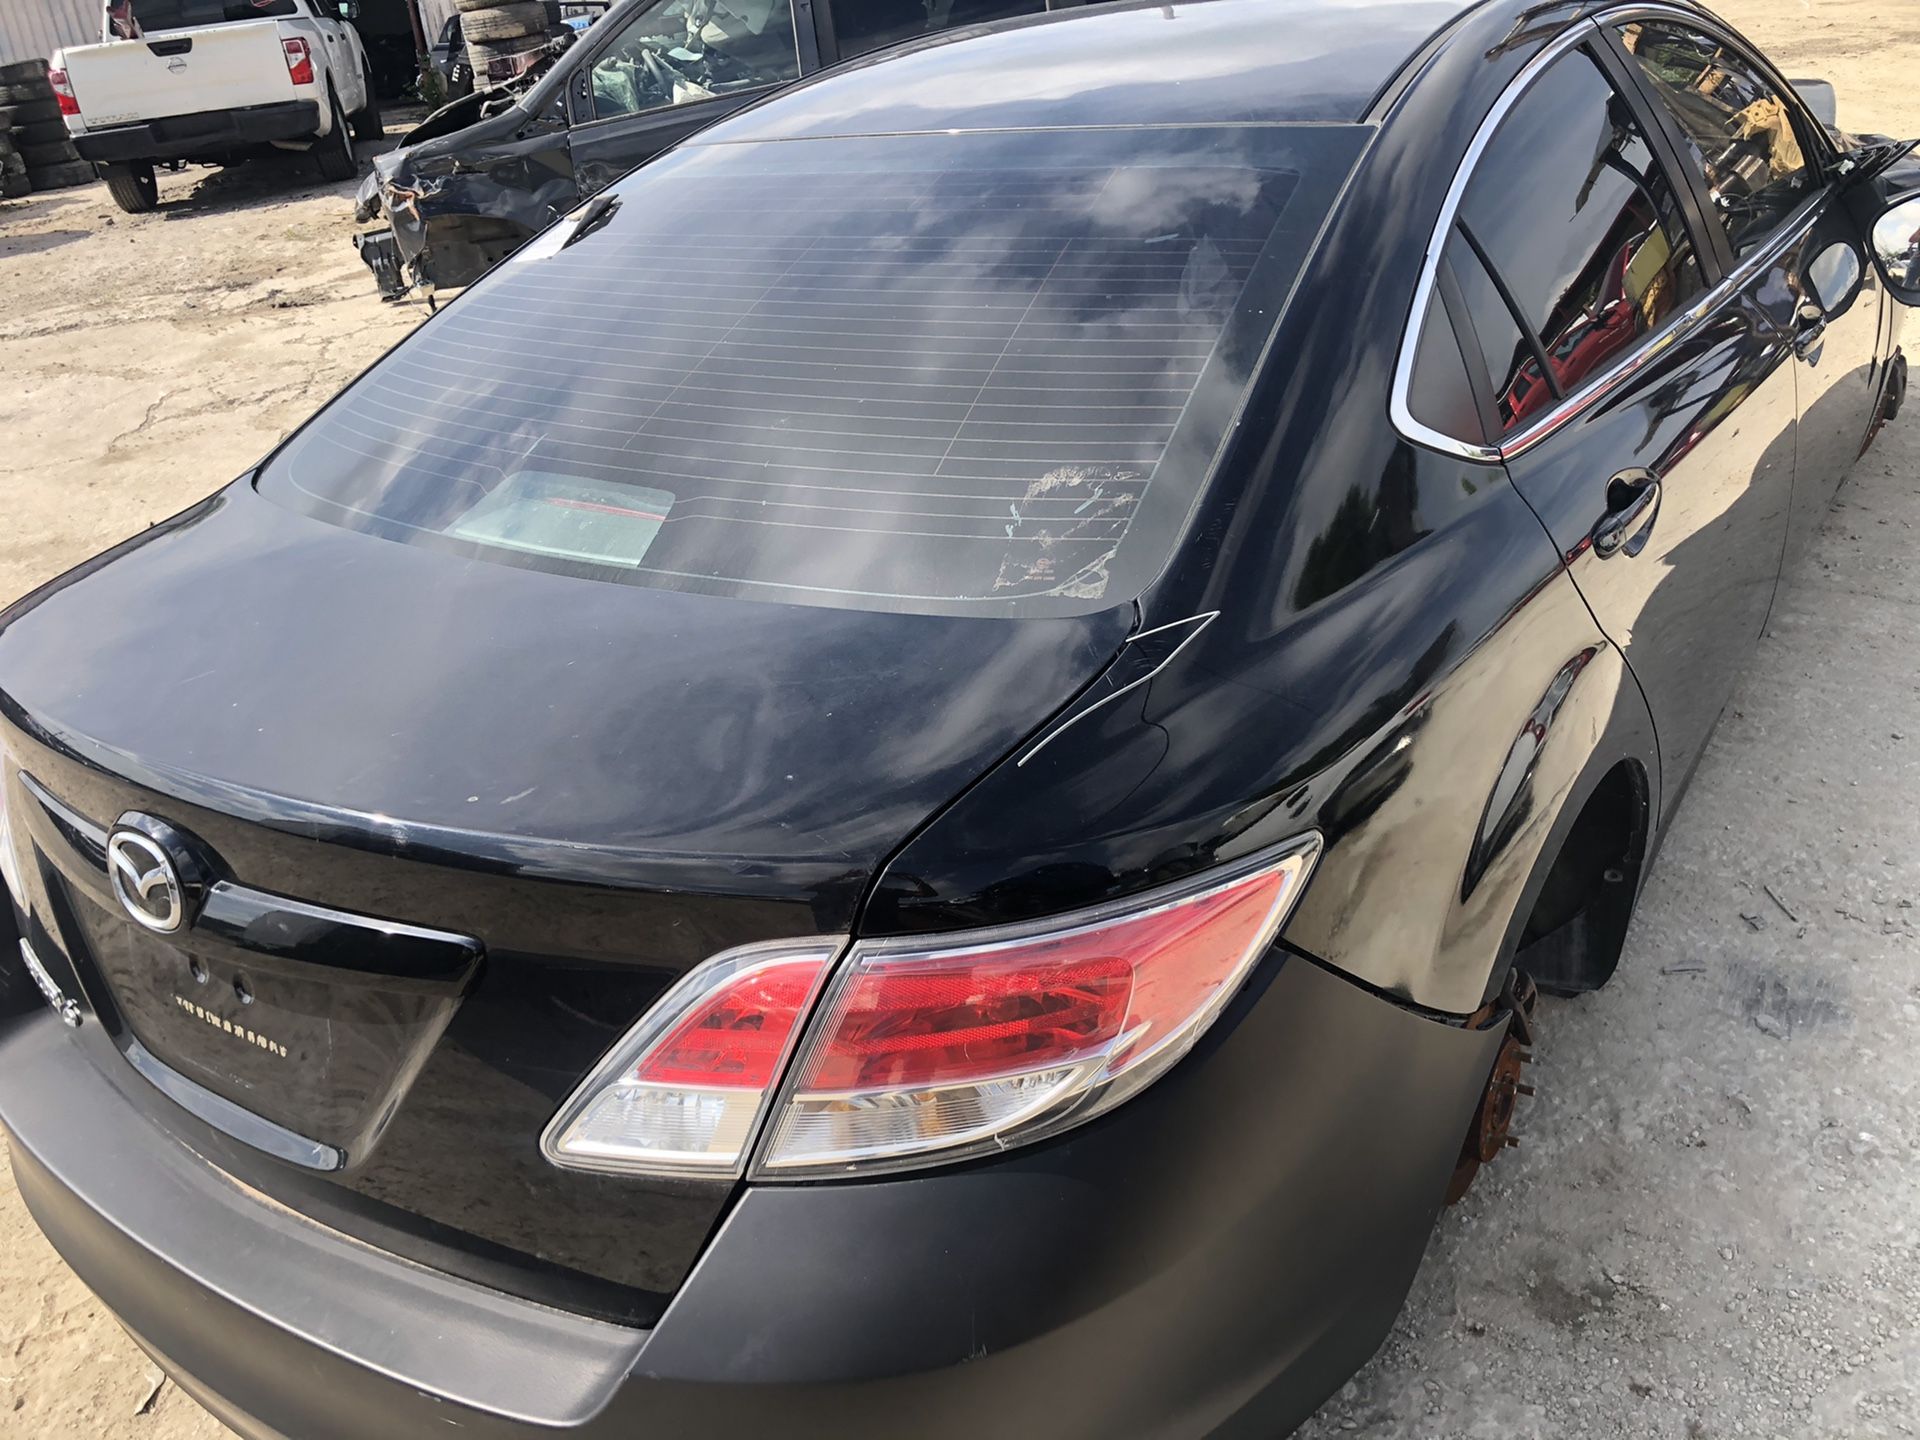 2011 Mazda 6 for Parts